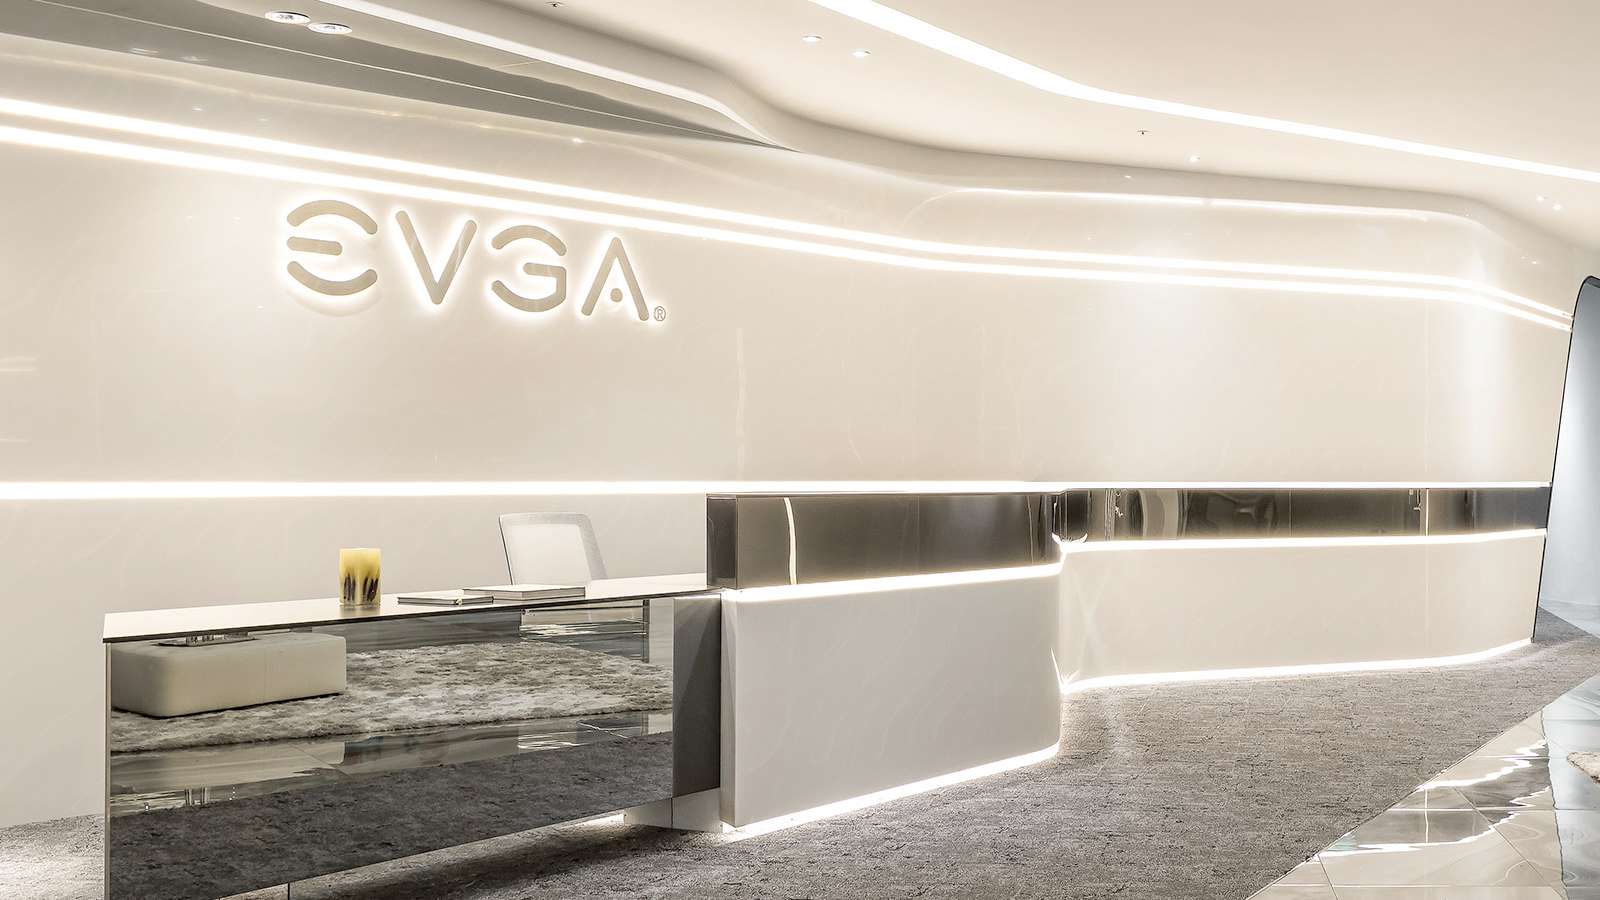 EVGA Offices